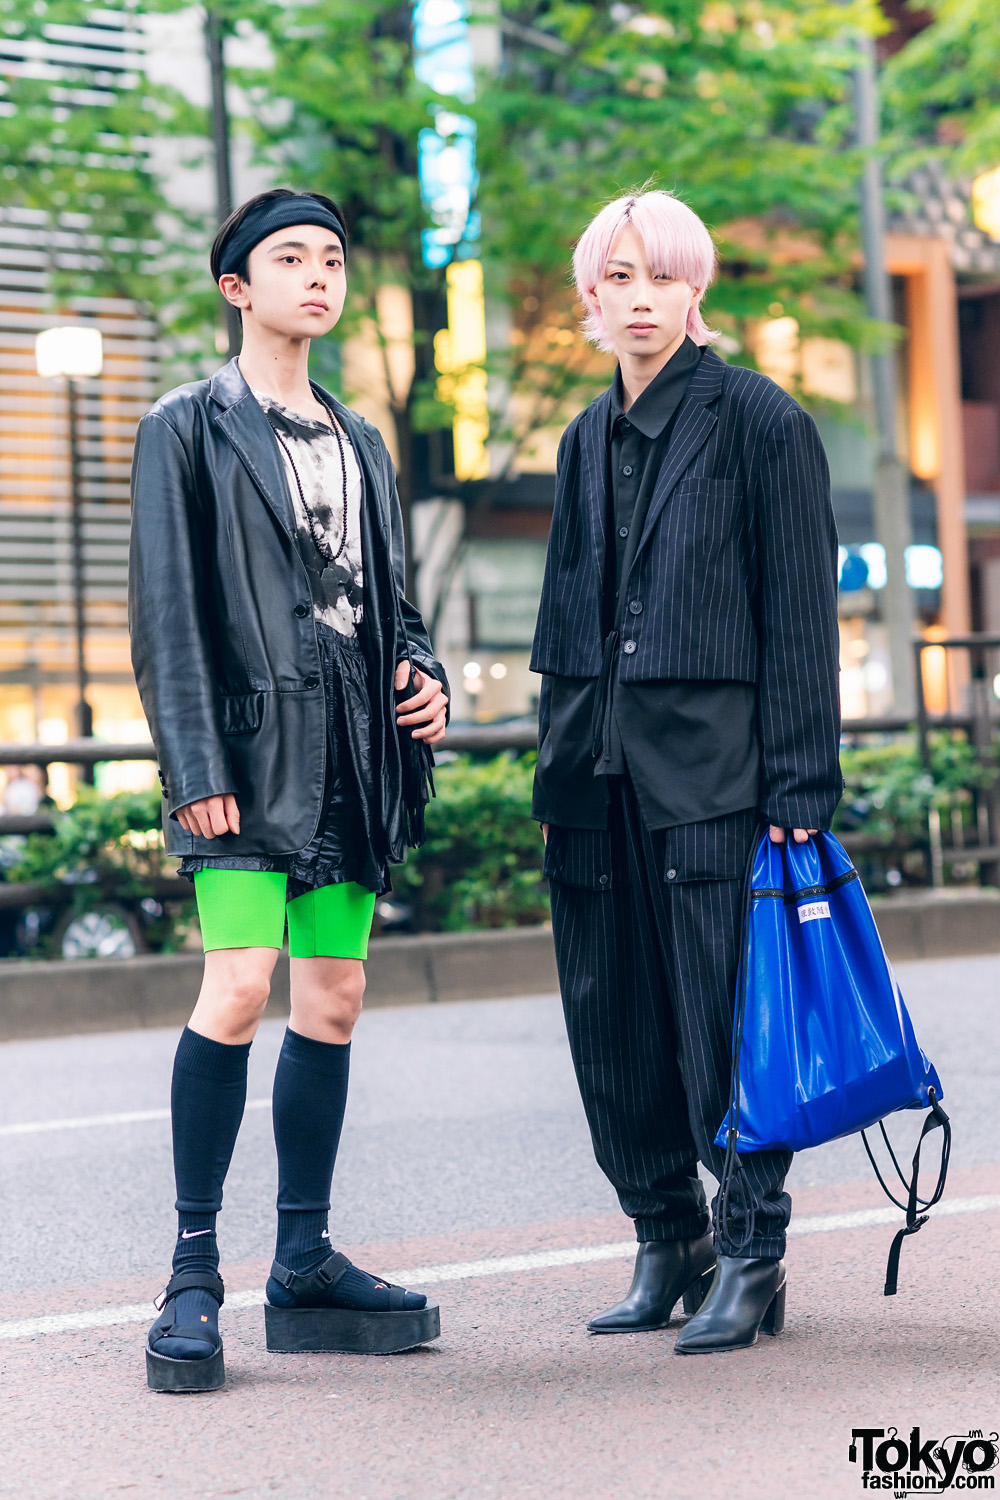 Tokyo Streetwear Styles w/ Pink Hair, ESC Studio Pinstripe Suit, Faux Leather Blazer, Cycling Shorts, Fringed Bag & Asos Pointy Boots